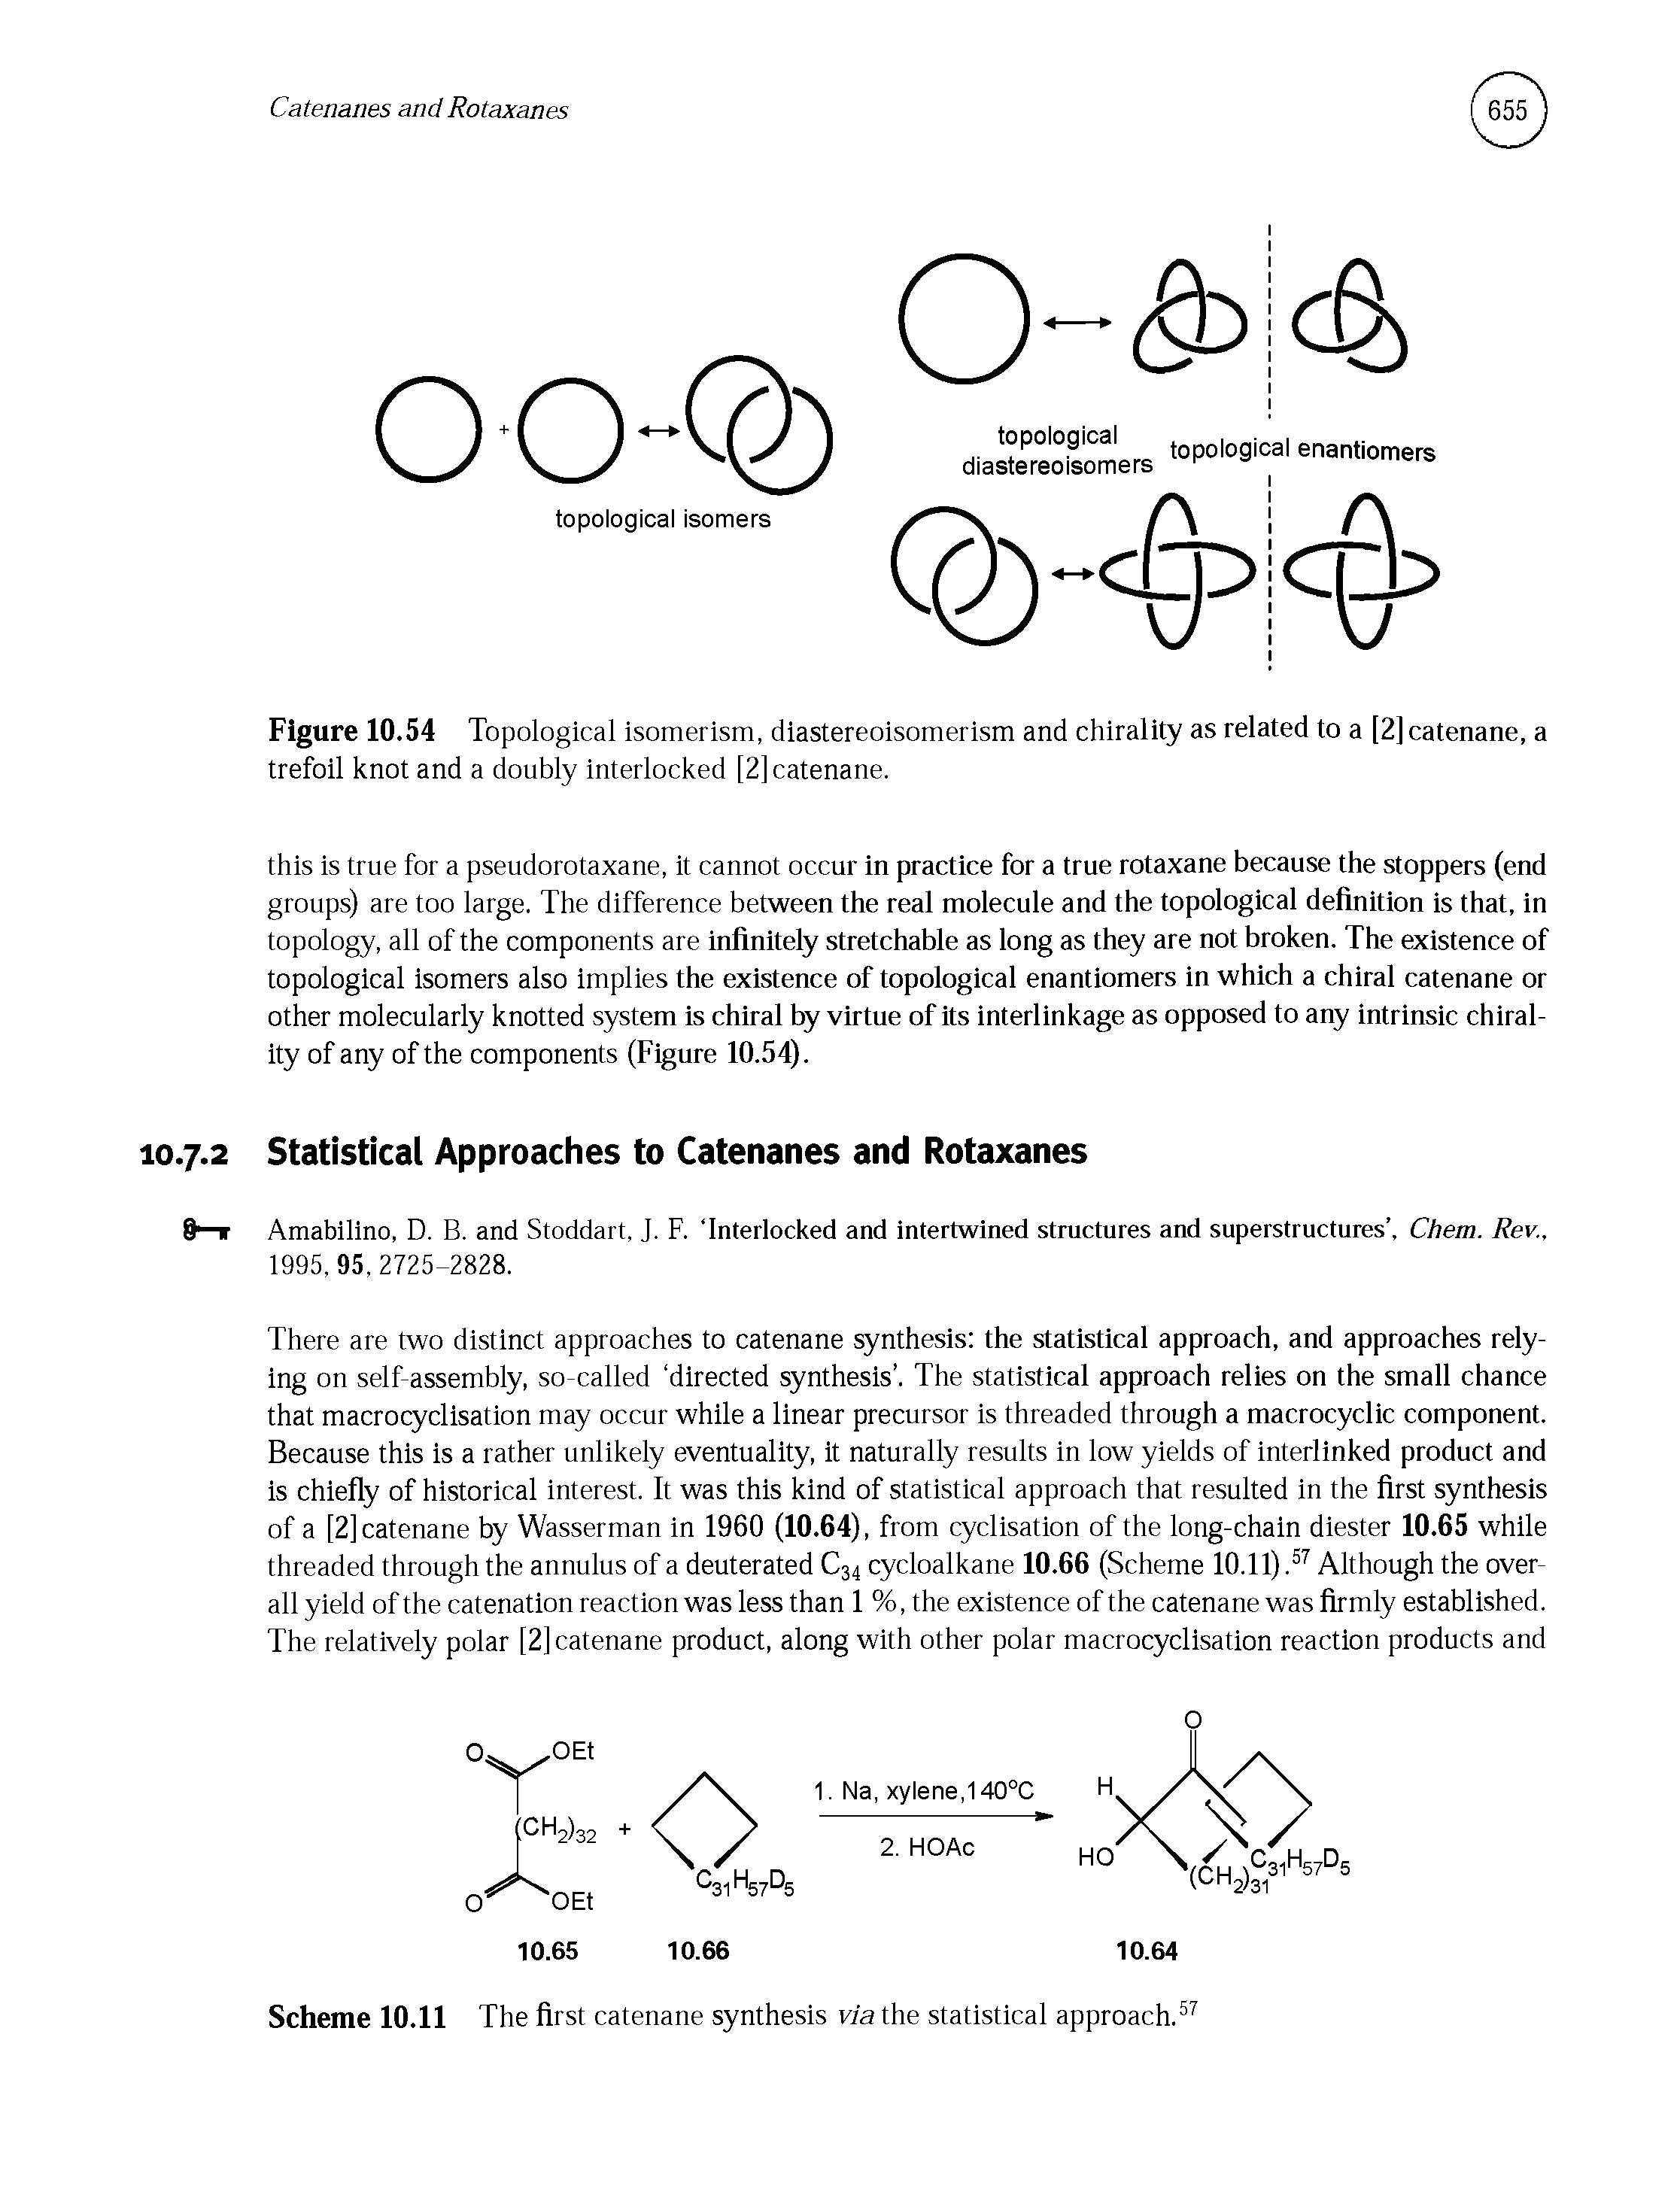 Figure 10.54 Topological isomerism, diastereoisomerism and chirality as related to a [2] catenane, a trefoil knot and a doubly interlocked [2] catenane.